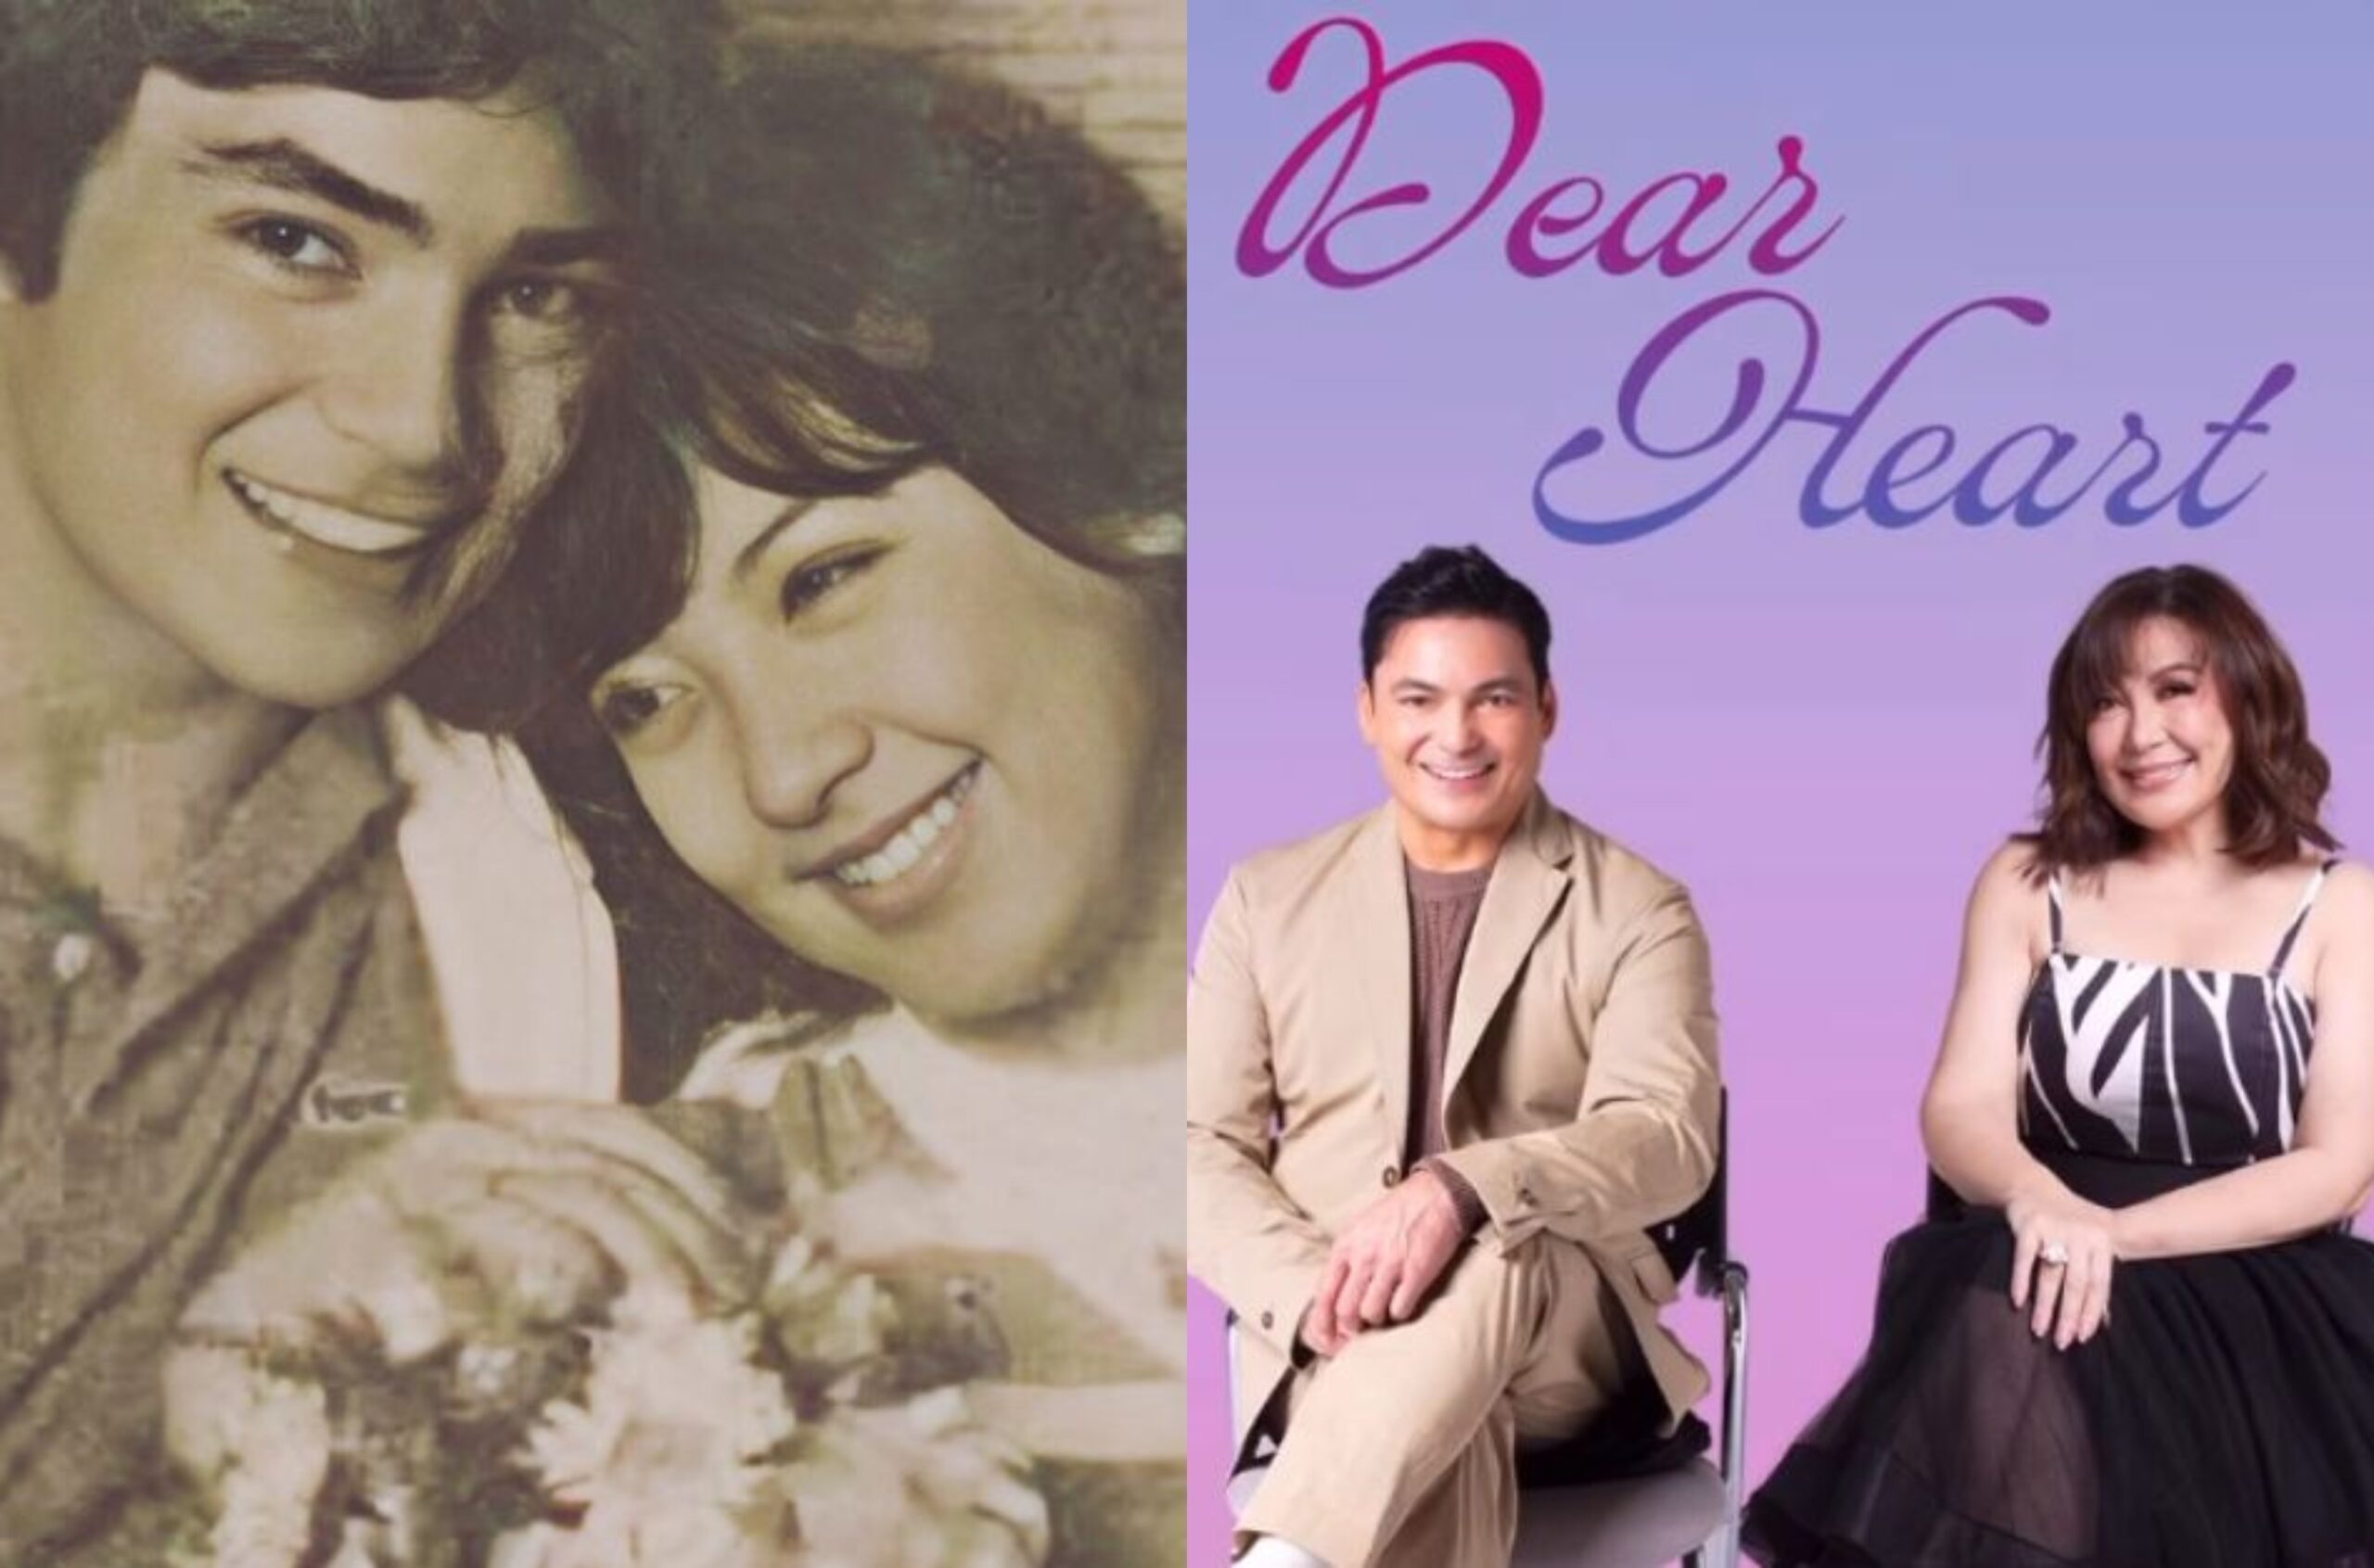 LOOK Sharon Gabby Concepcion to hold reunion concert in October